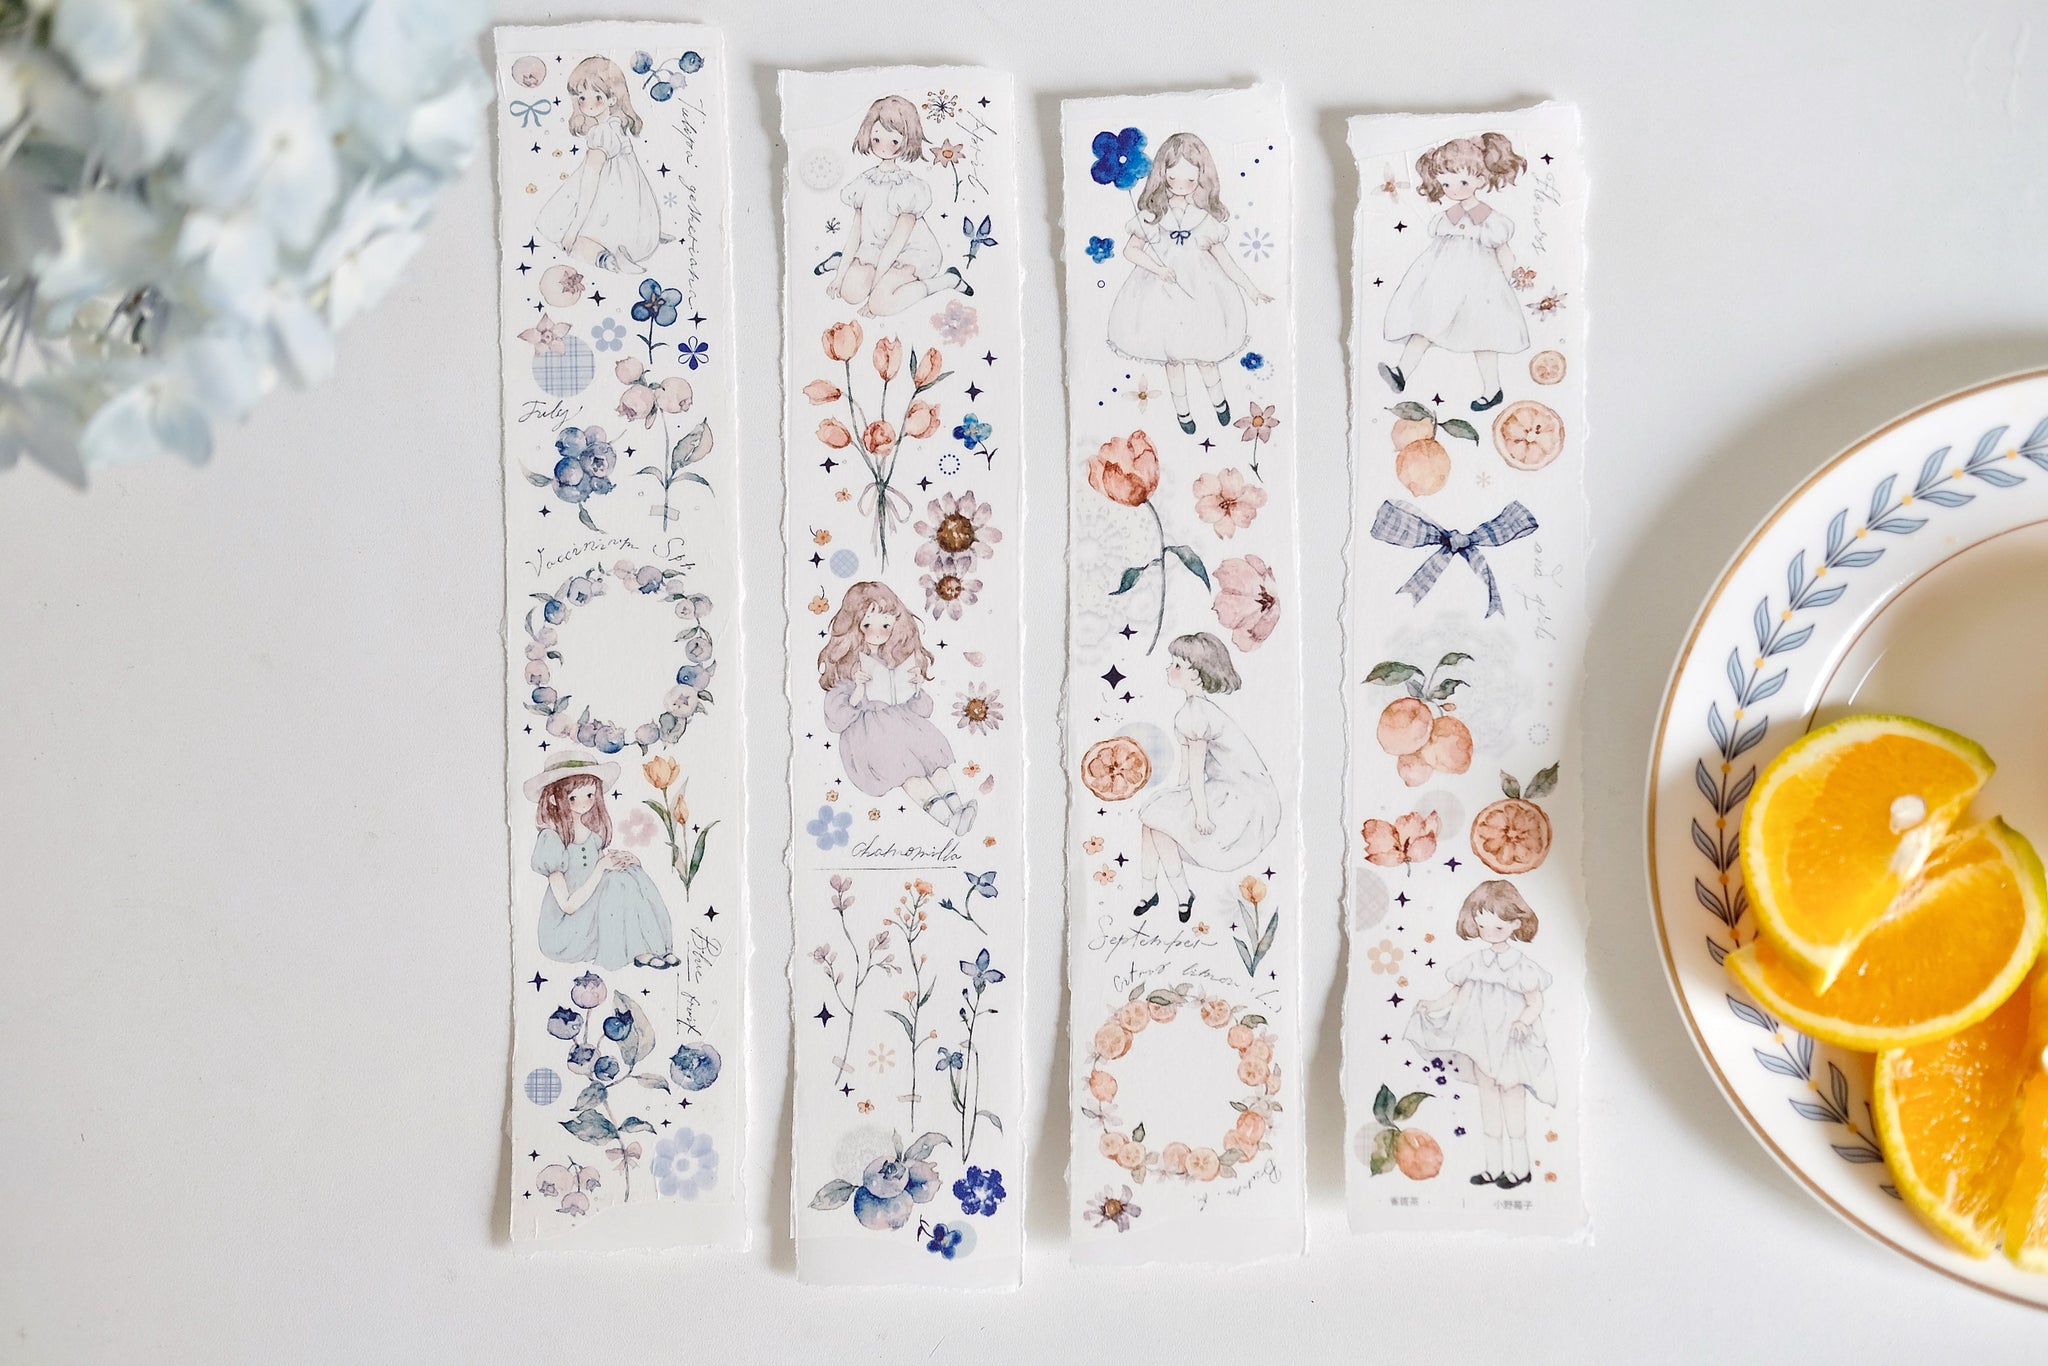 Freckles Tea Tape: Wildberry